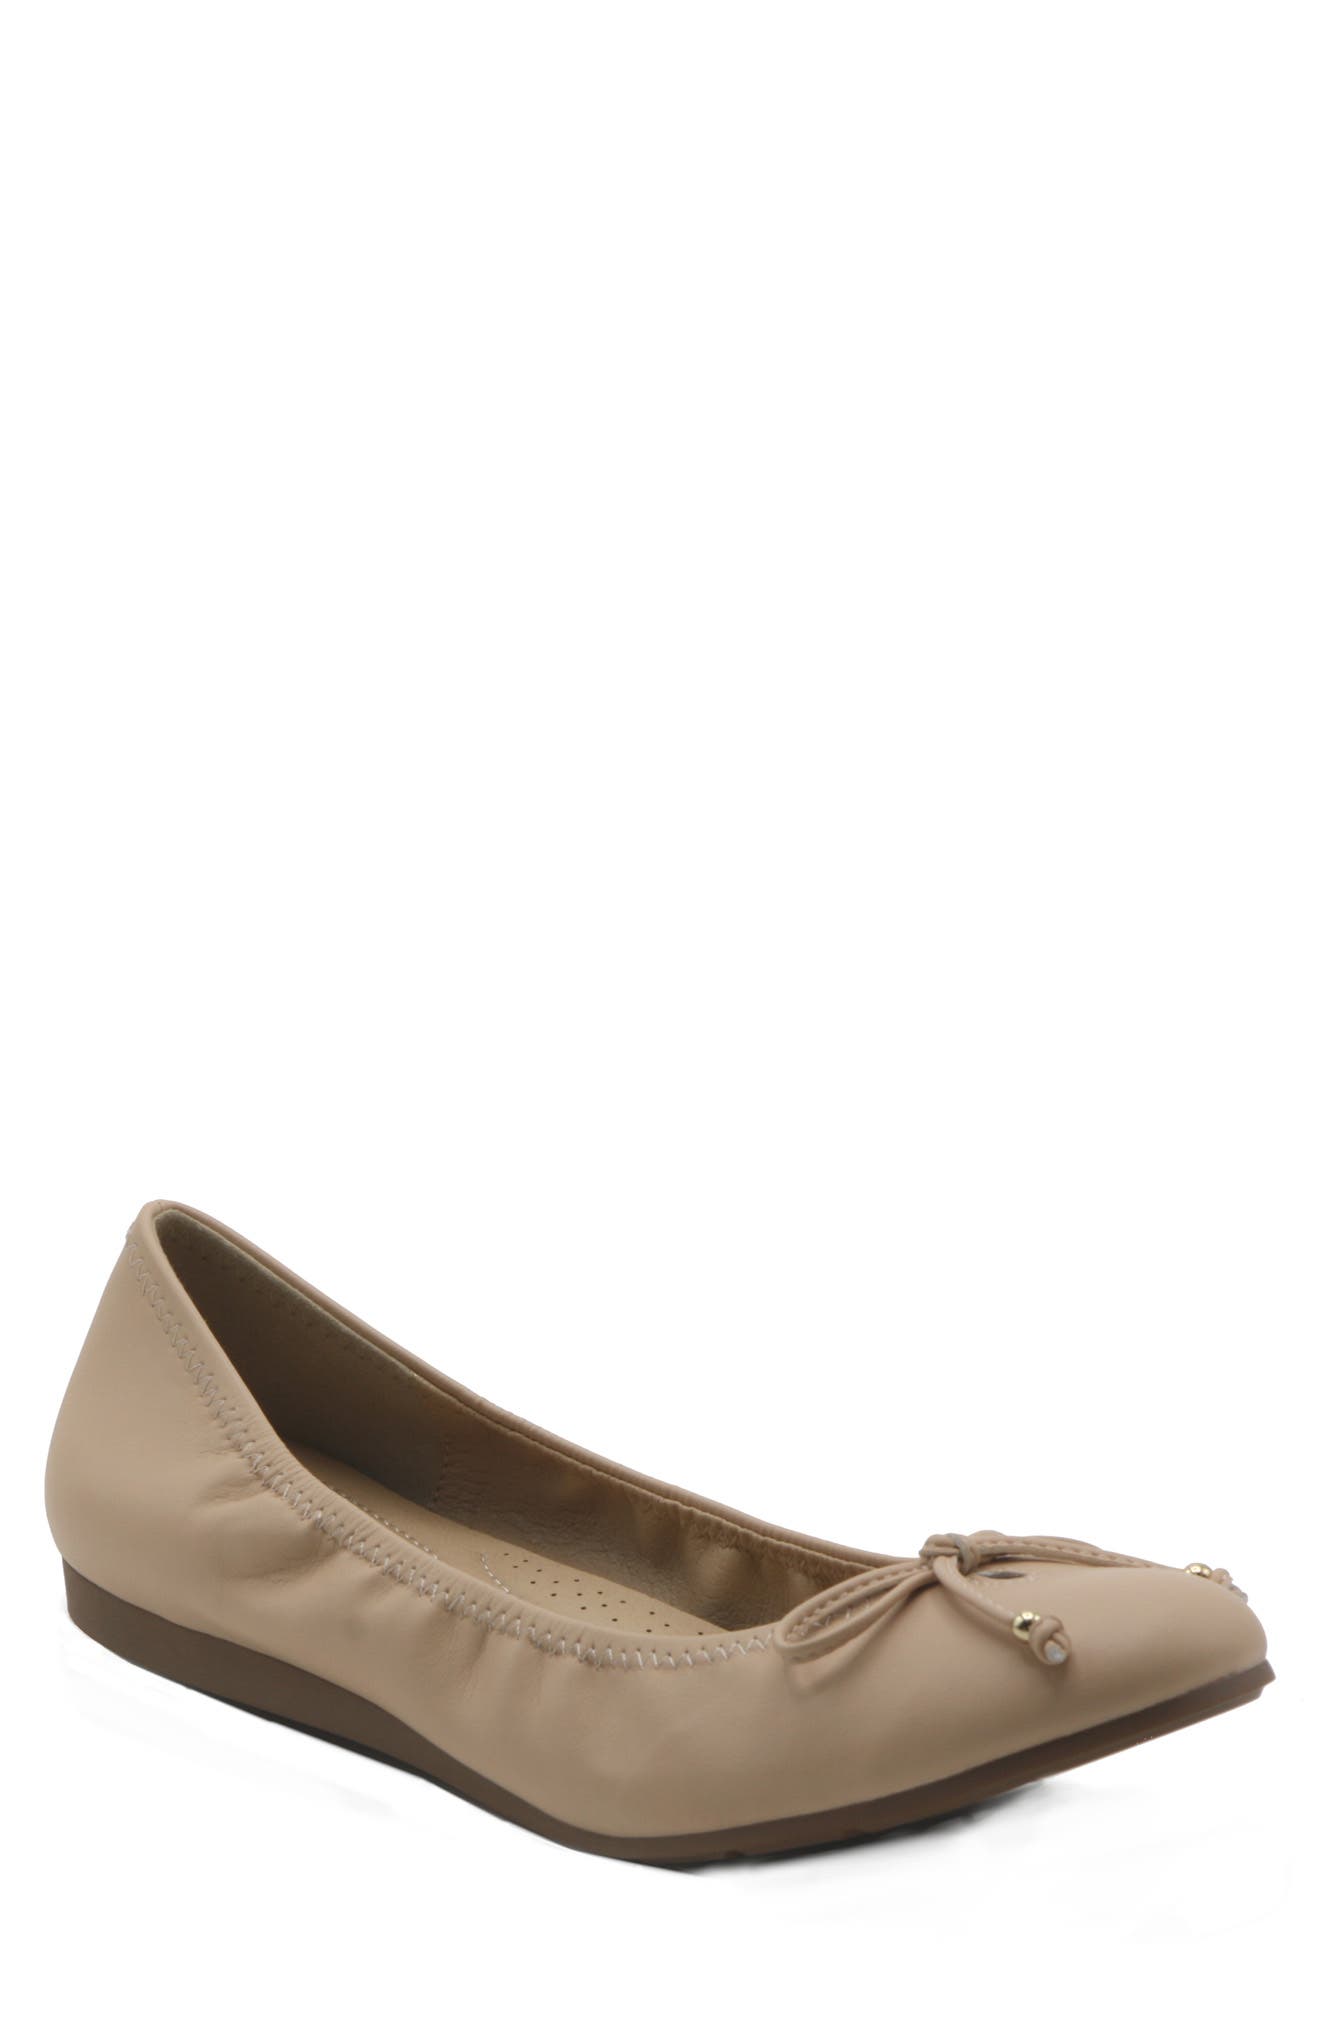 Mootsies Tootsies Women's Cameo Ballet Flats Women's Shoes In Sand-fl